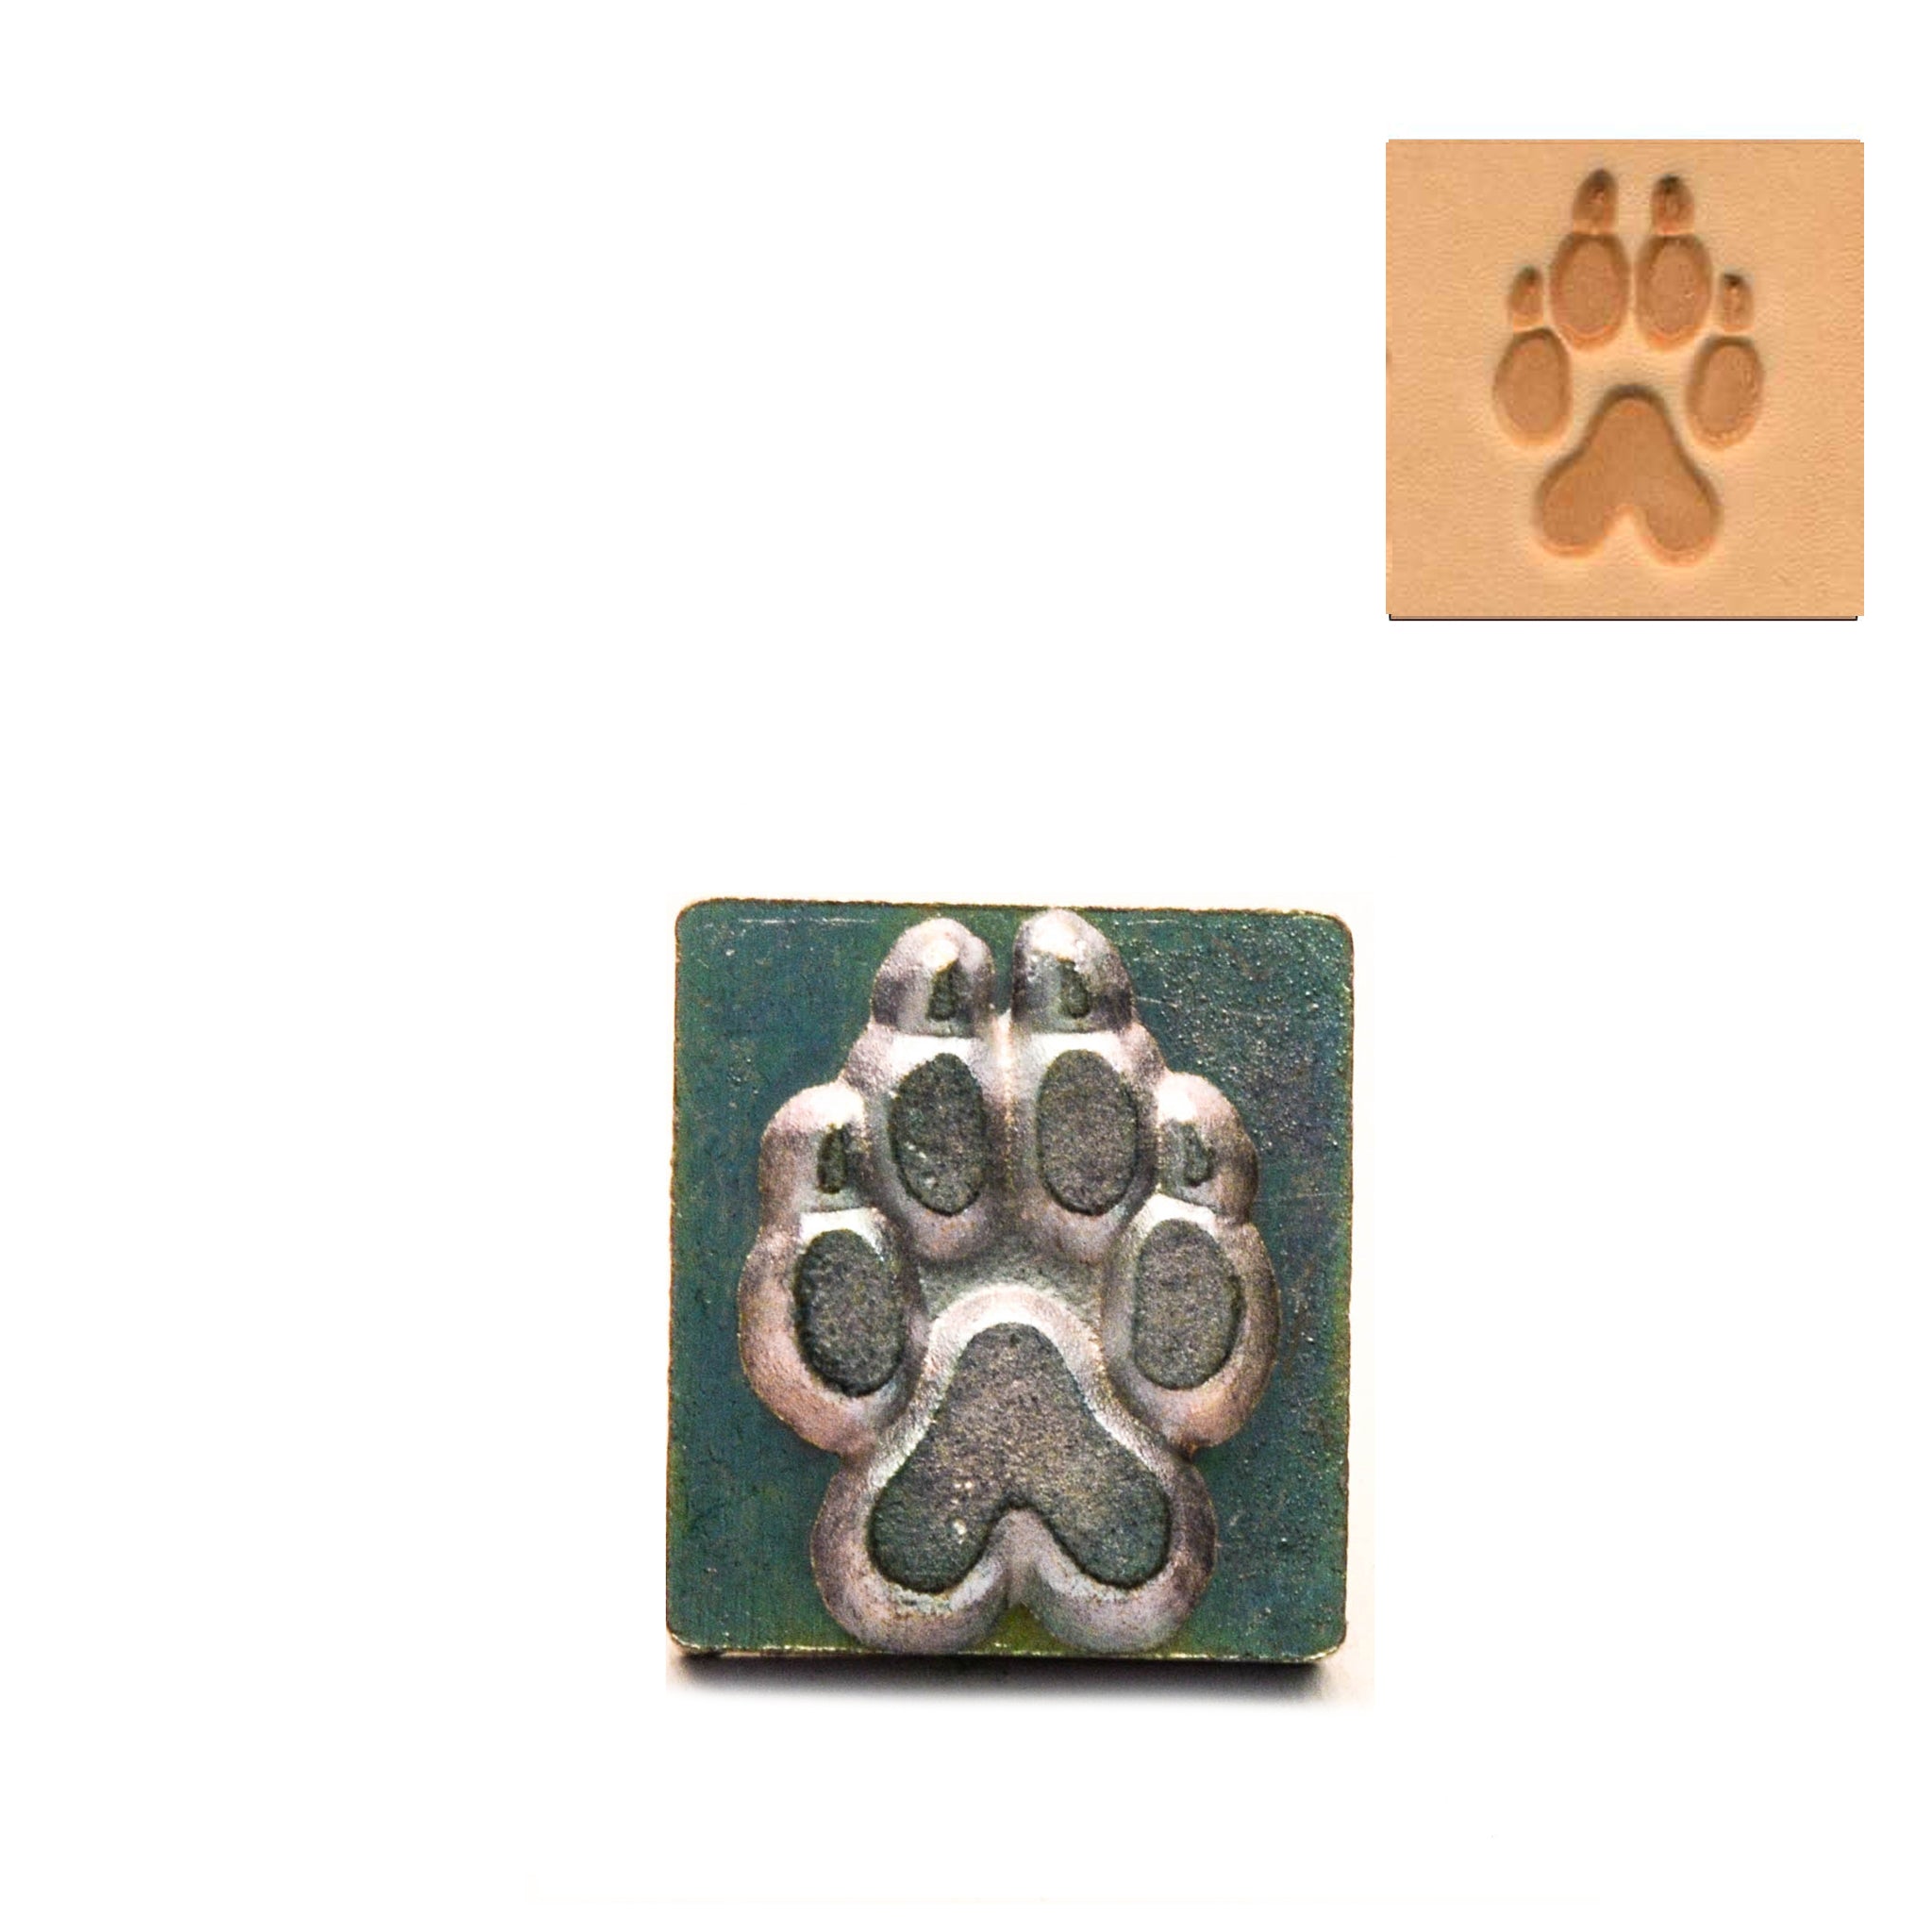 Wolf Track 3D Embossing Stamp from Identity Leathercraft